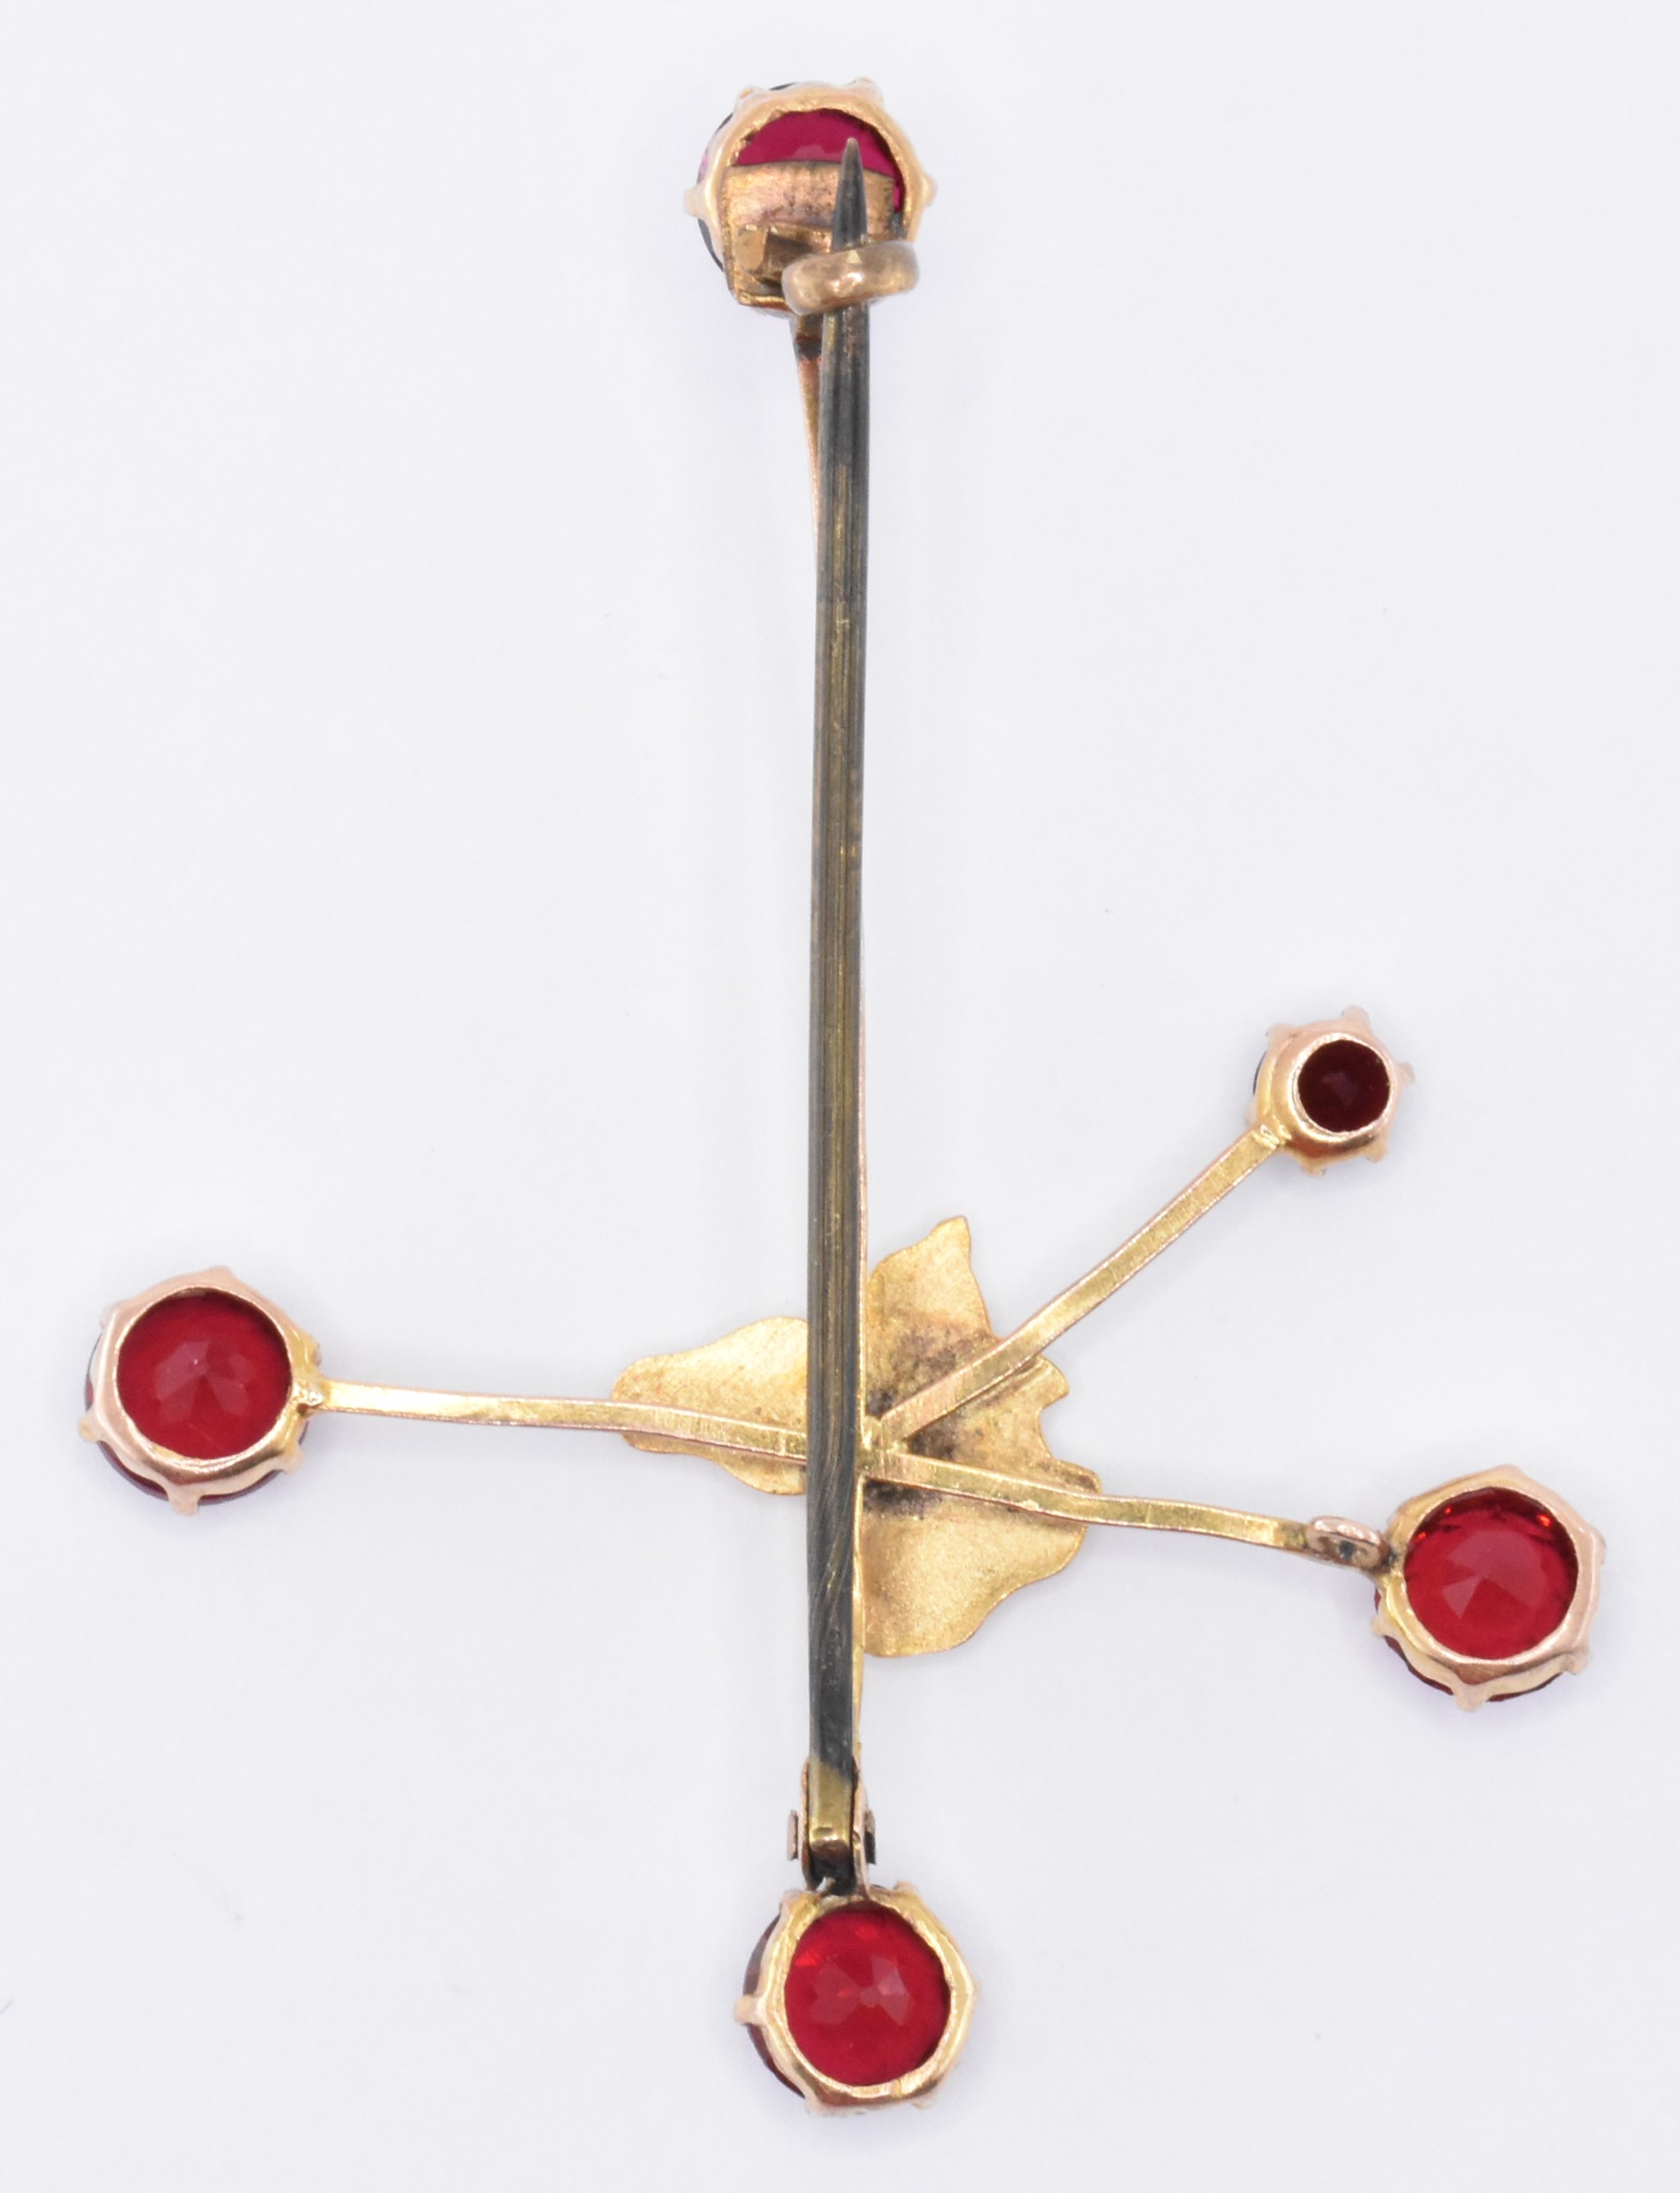 9CT GOLD & RED STONE AFRICA BROOCH - Image 3 of 4